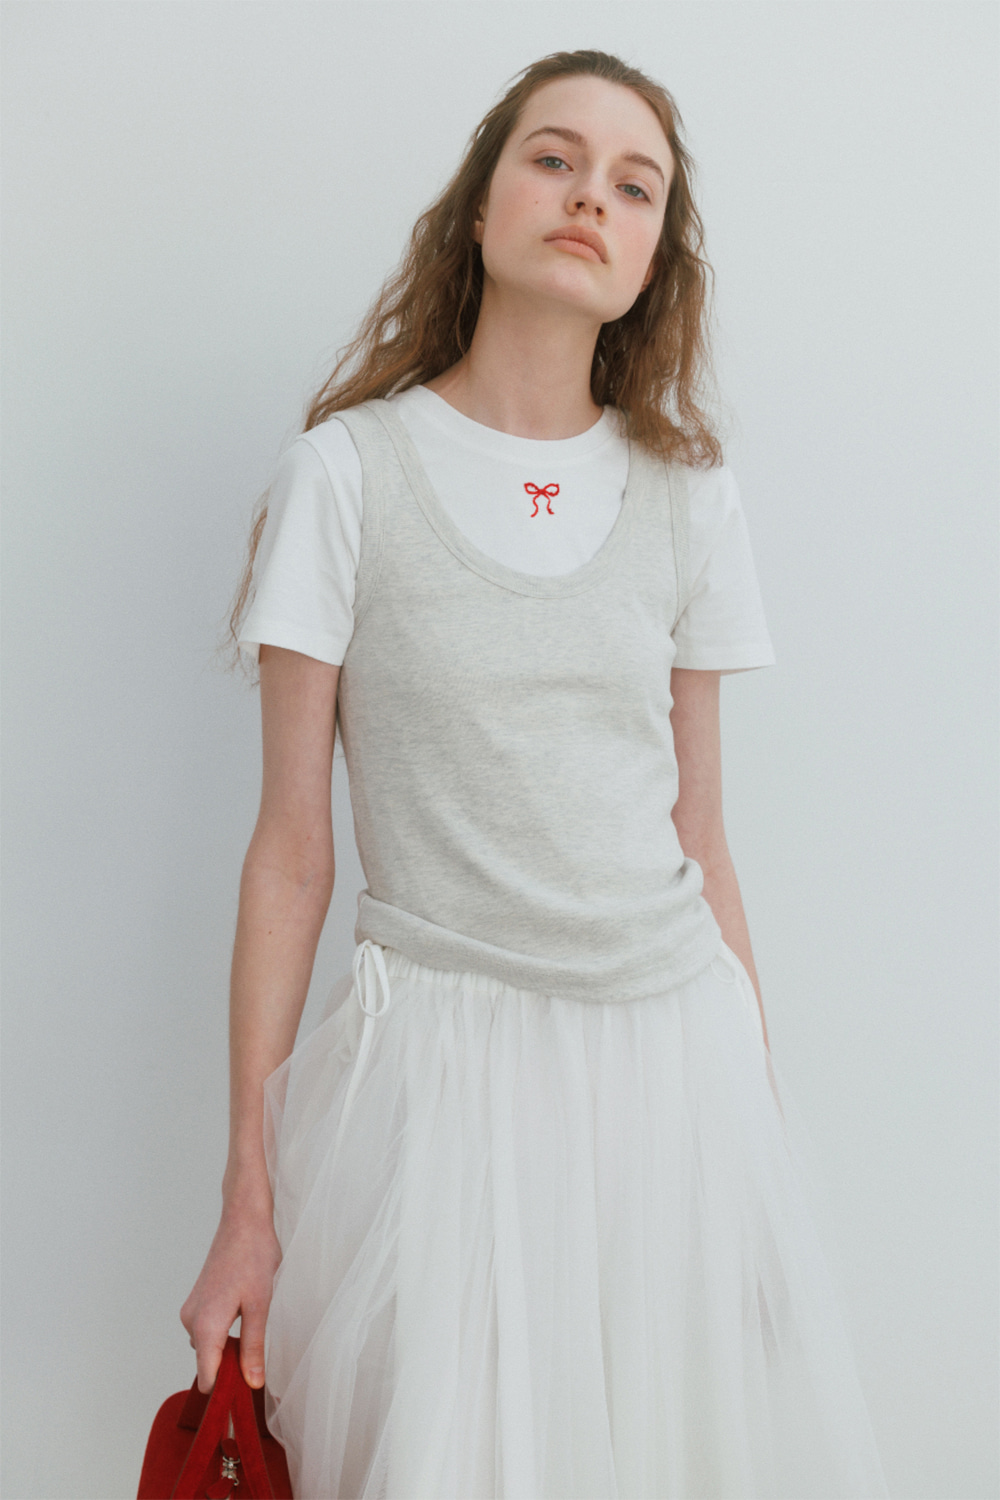 [2 REORDER] Embroidery Beads Tee in White